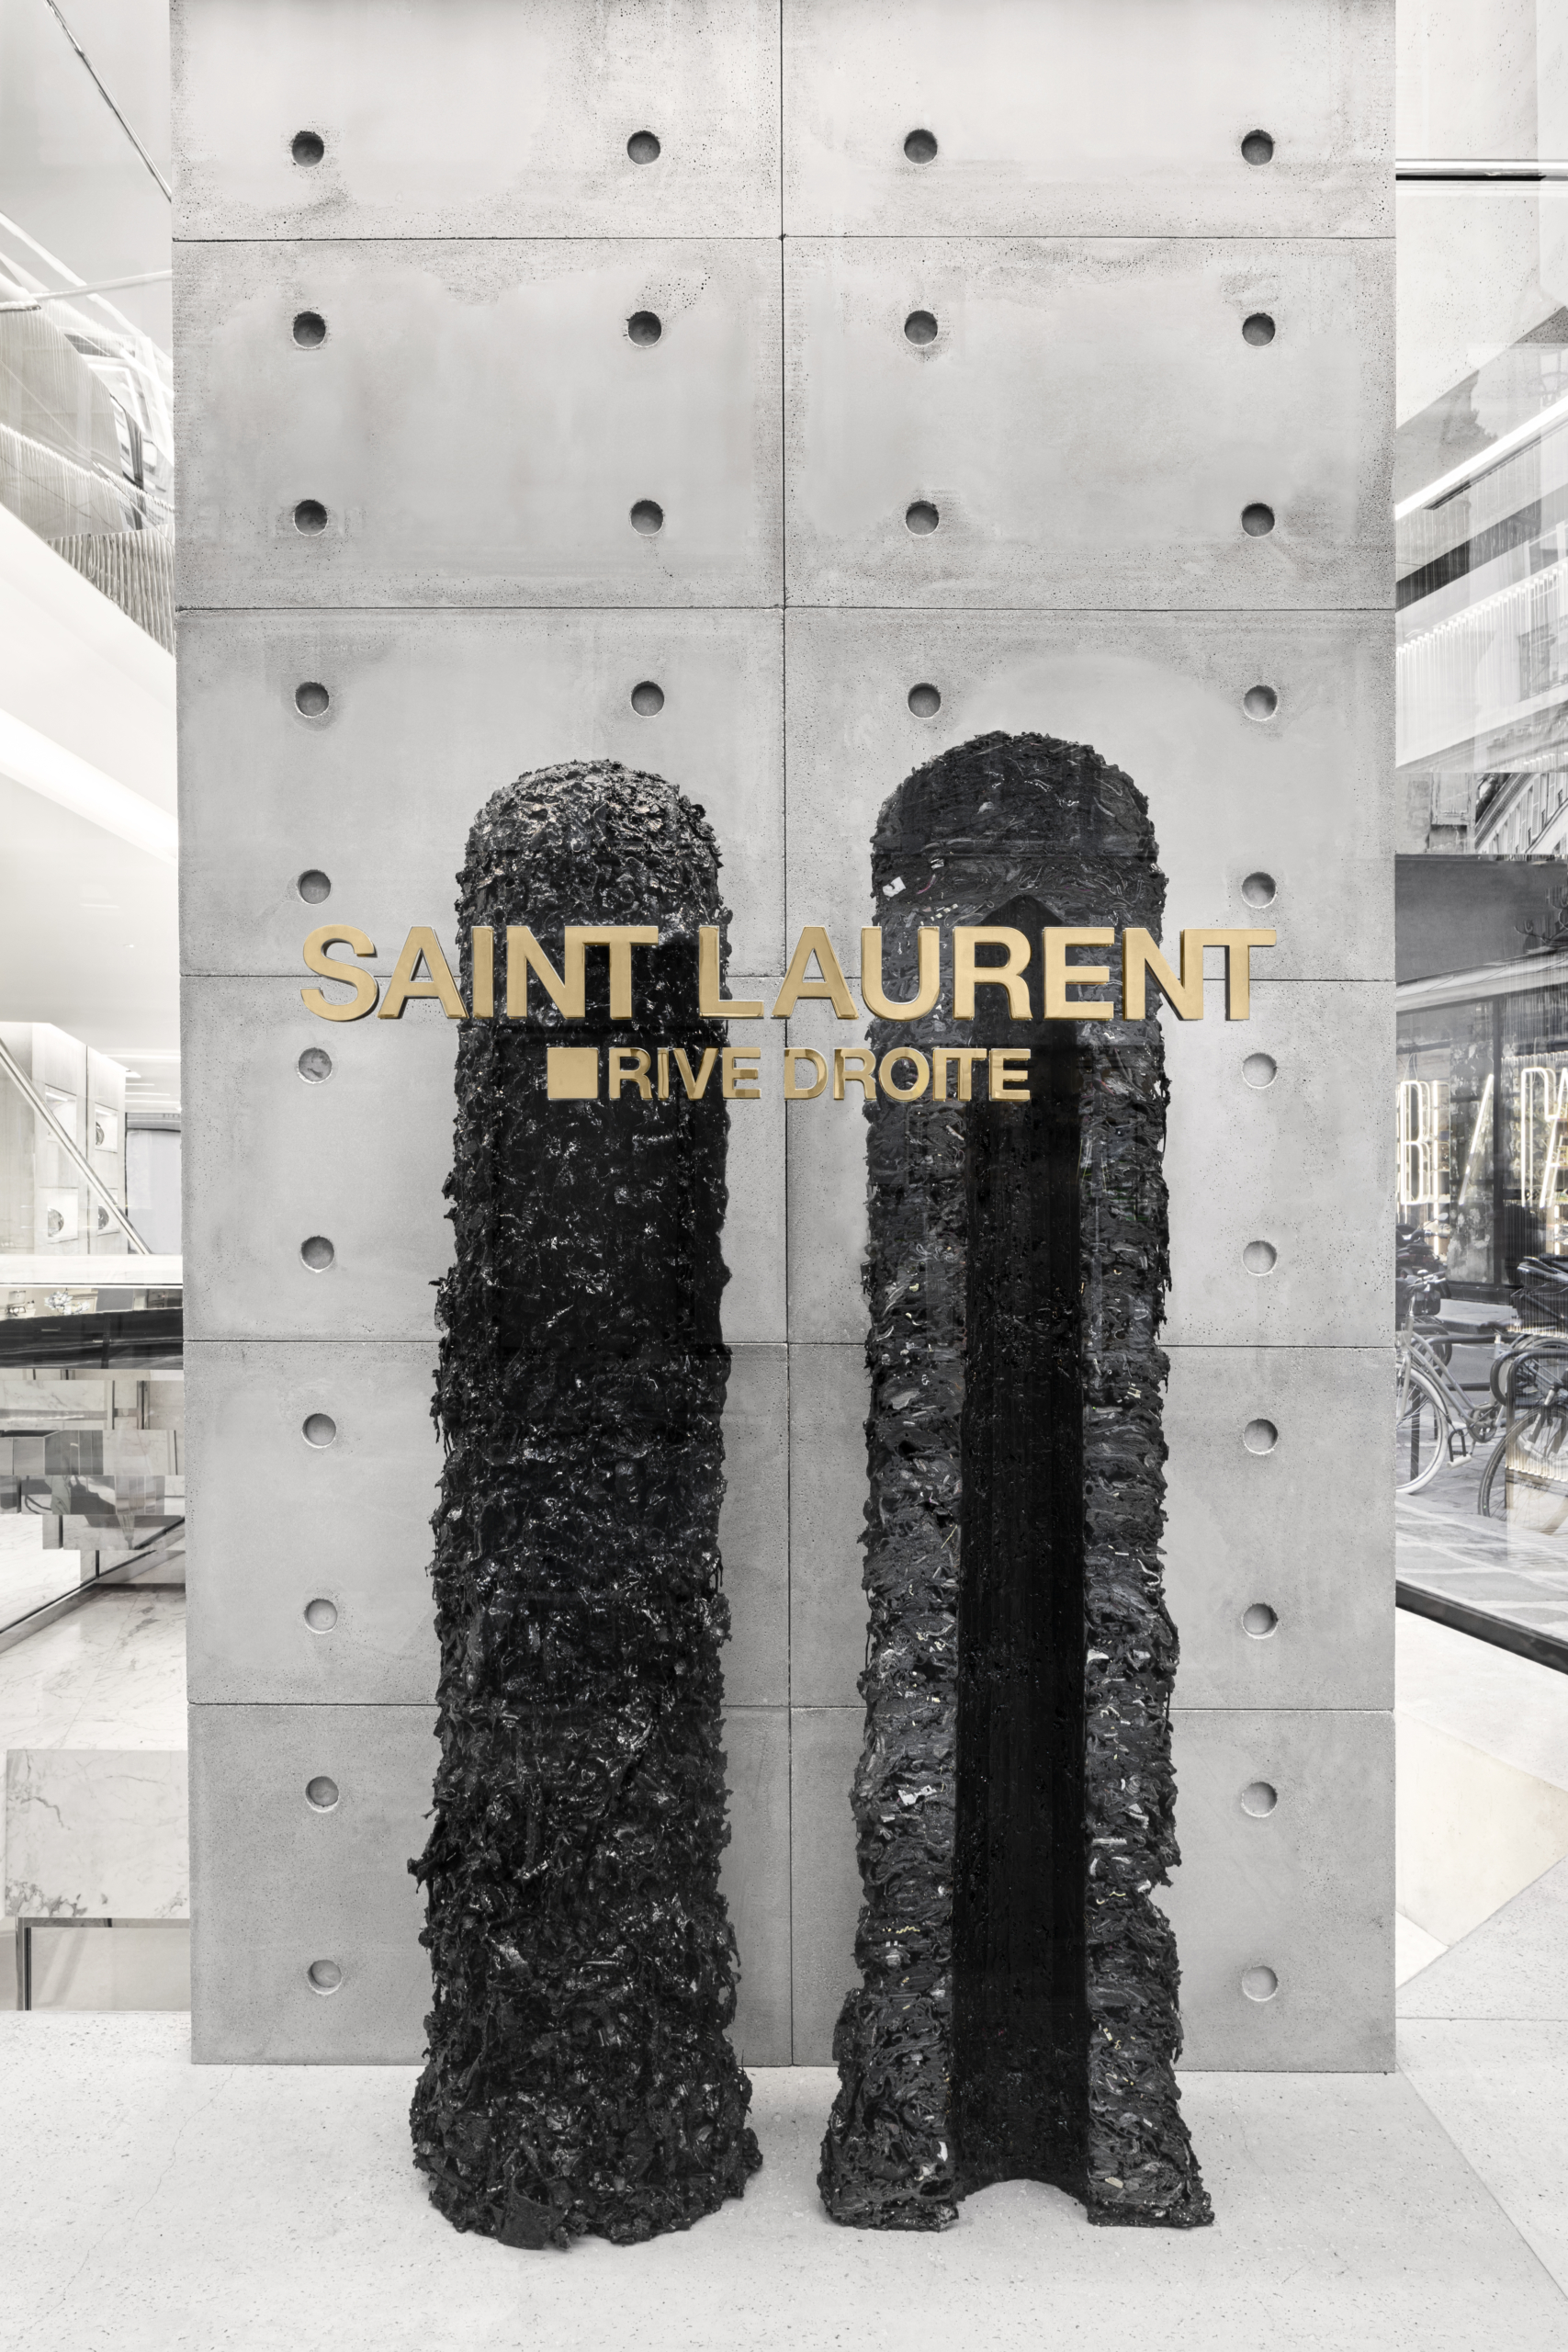 Saint Laurent Rive Droite, Curated by Helmut Lang and Anthony